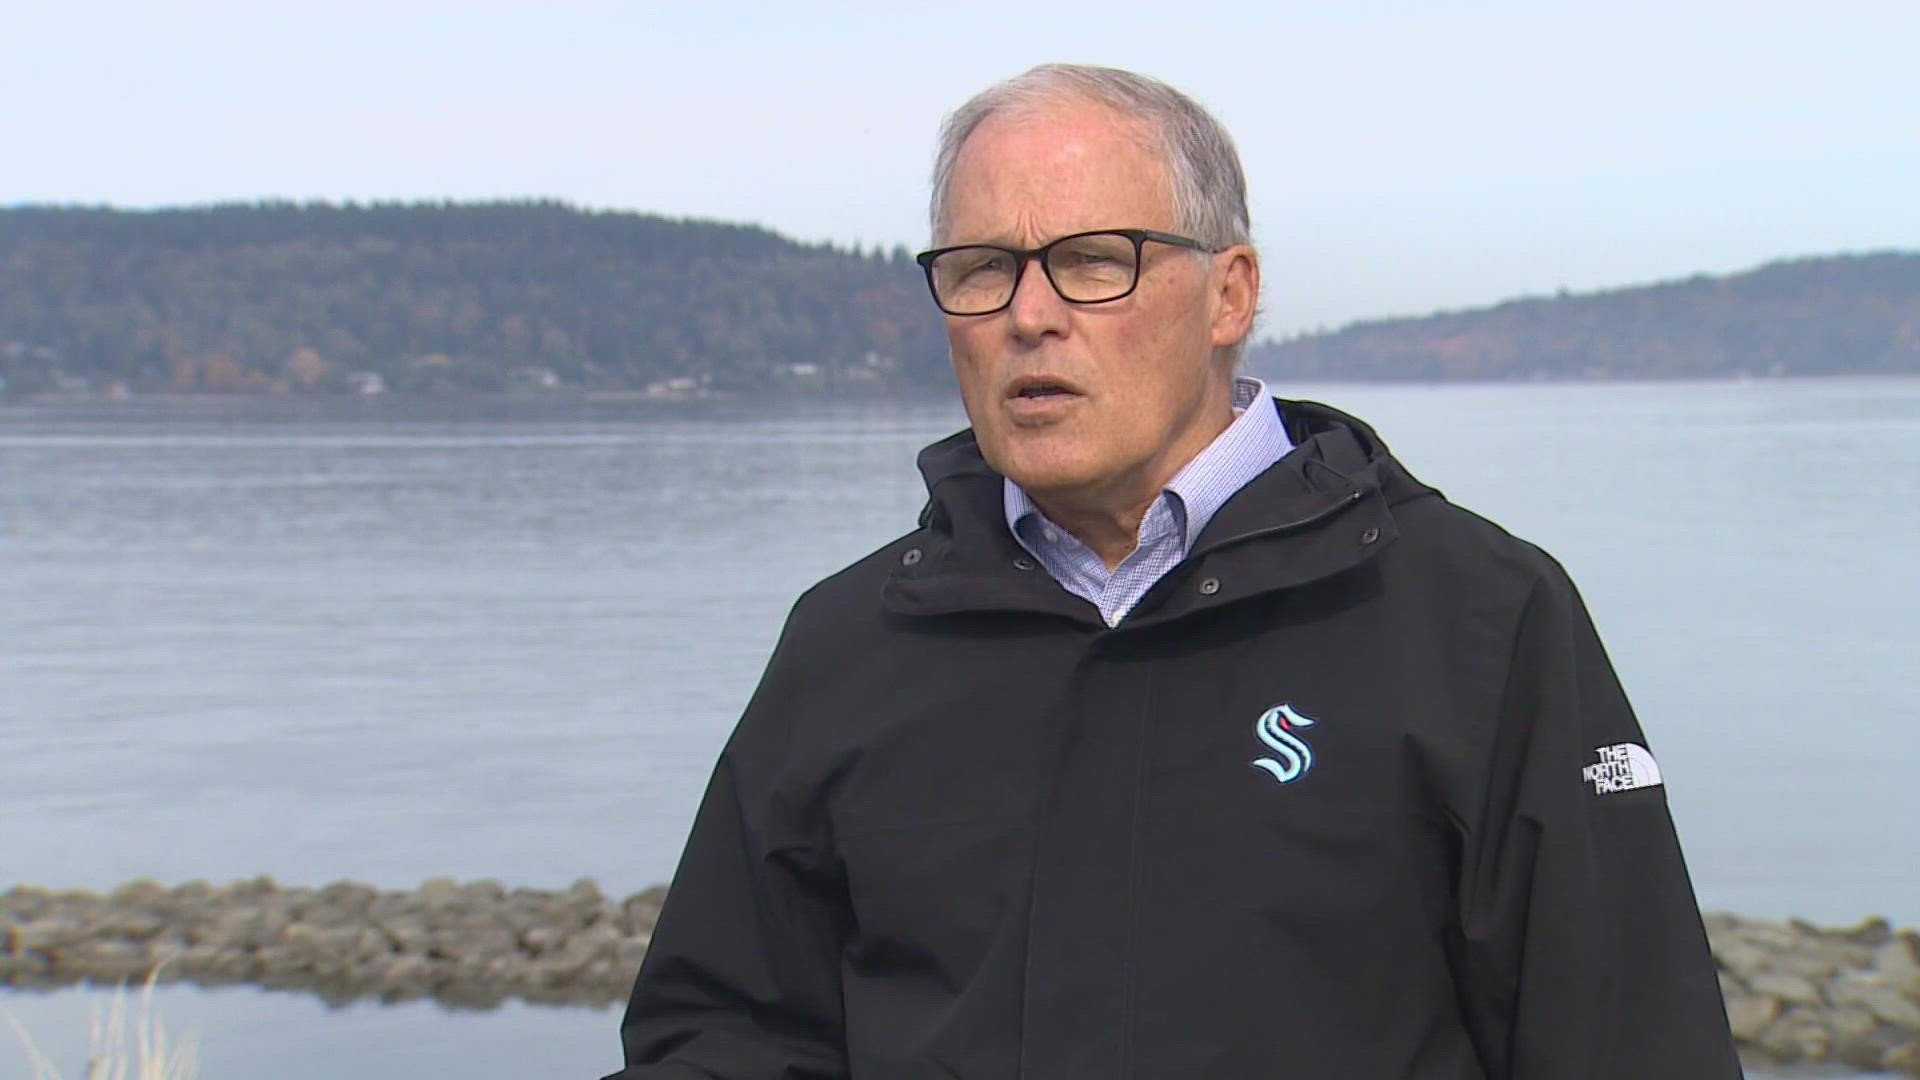 Washington Gov. Jay Inslee is praising the vaccine mandate with more than 90% of the state's nearly 60,000 employees getting the shot.